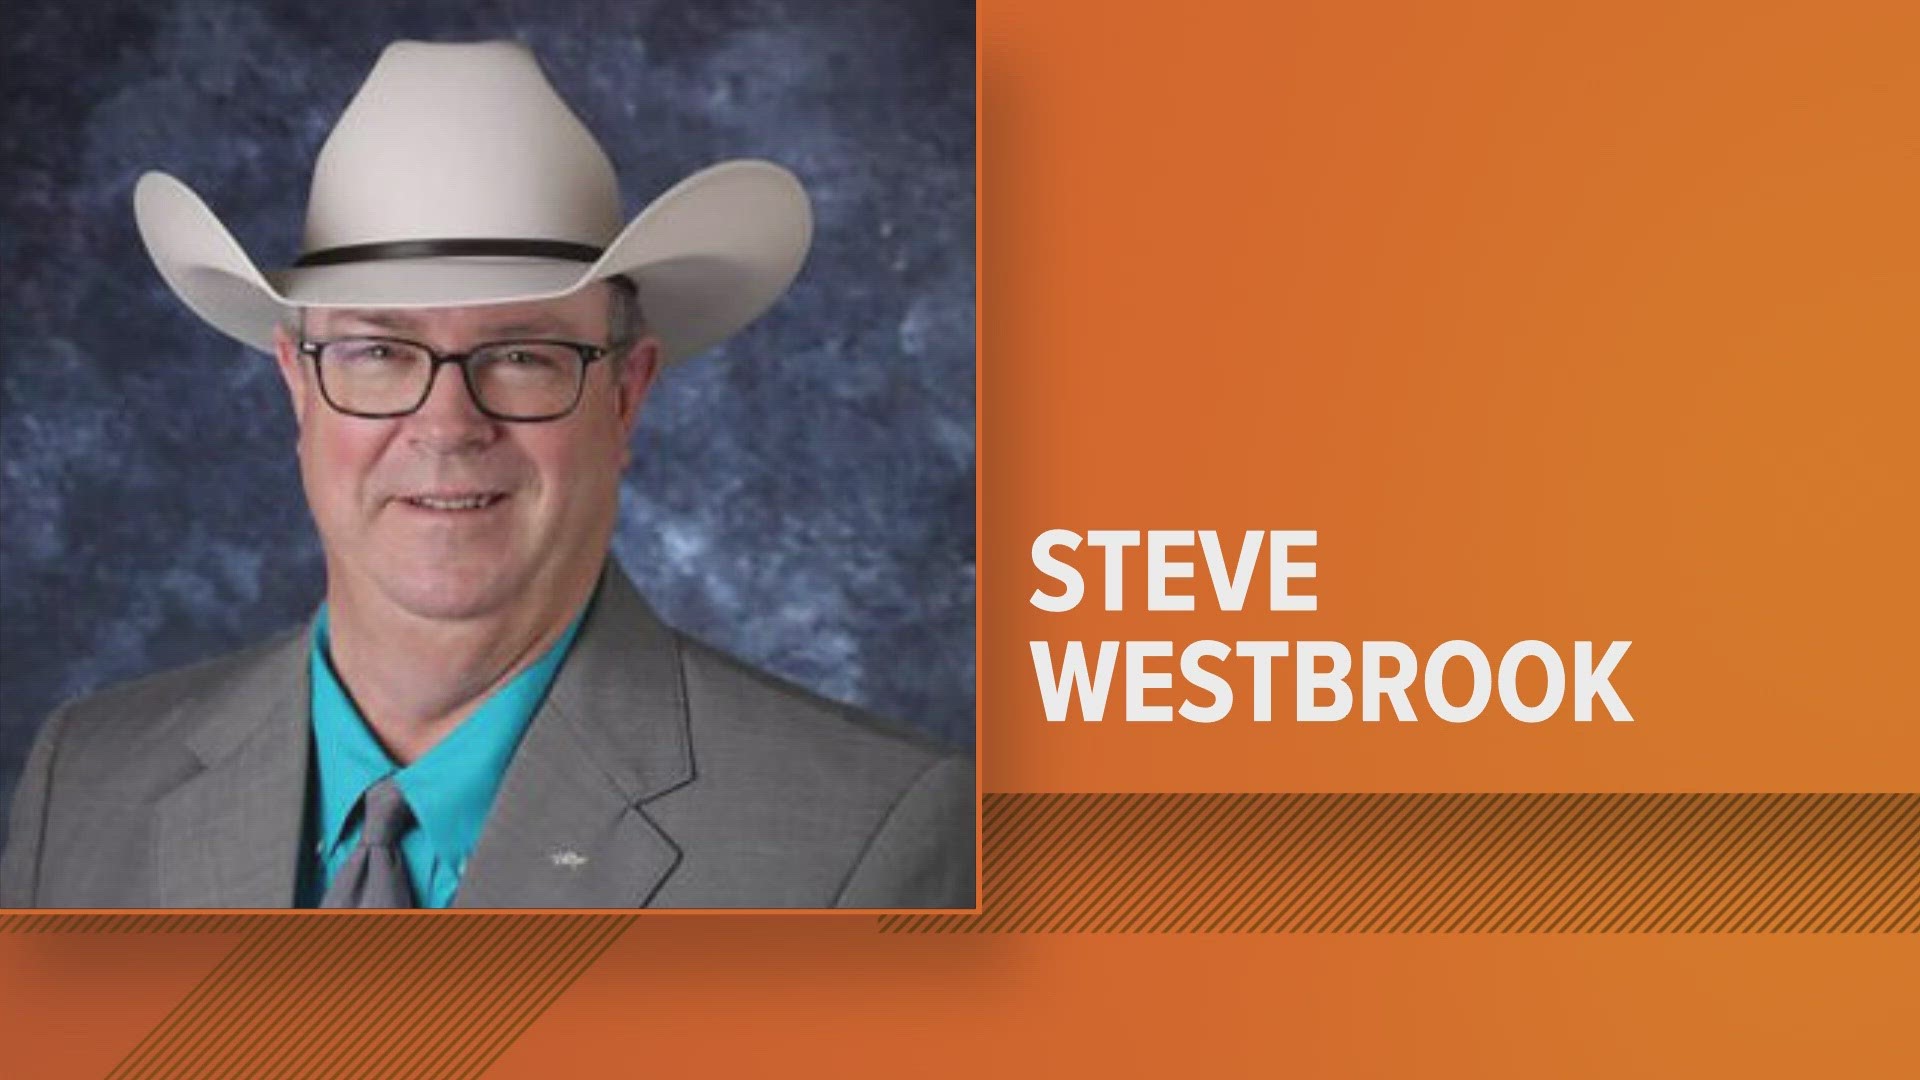 The executive director of the Texas Sheriffs' Association has resigned amid an investigation into allegations that he misappropriated funds.